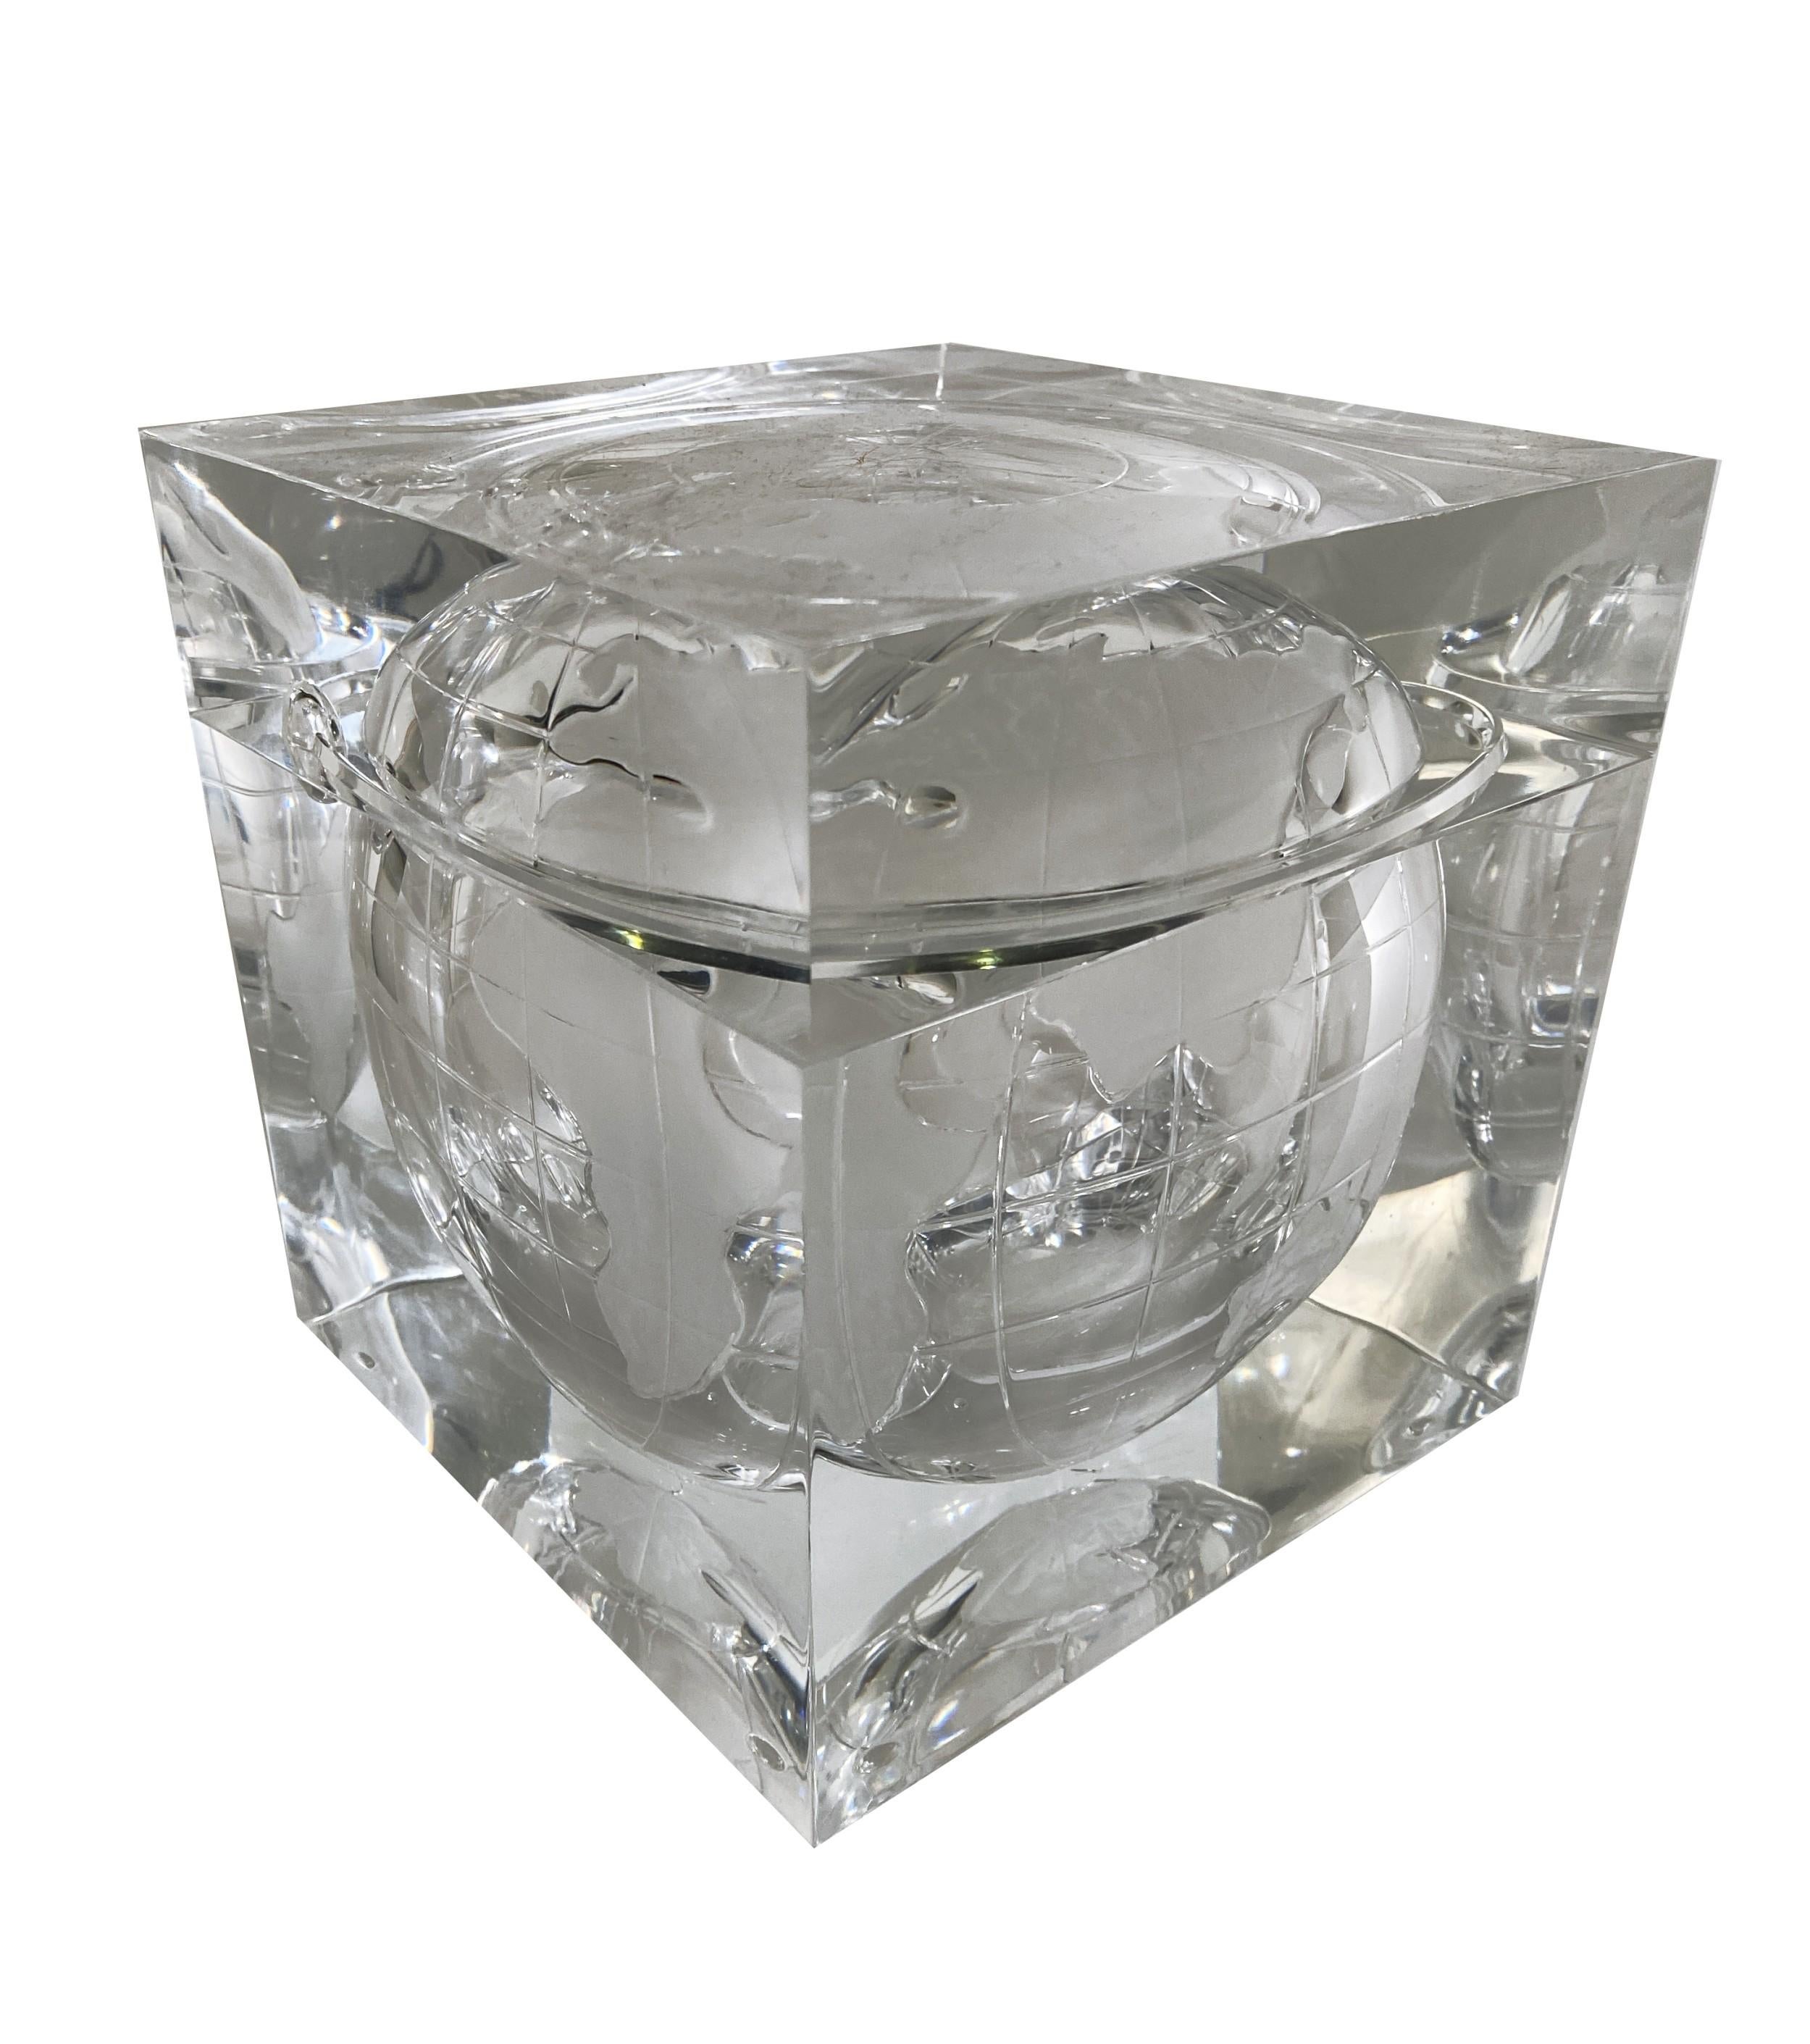 20th Century Mid-Century Modern Lucite Cube Ice Bucket with Etched Globe Design